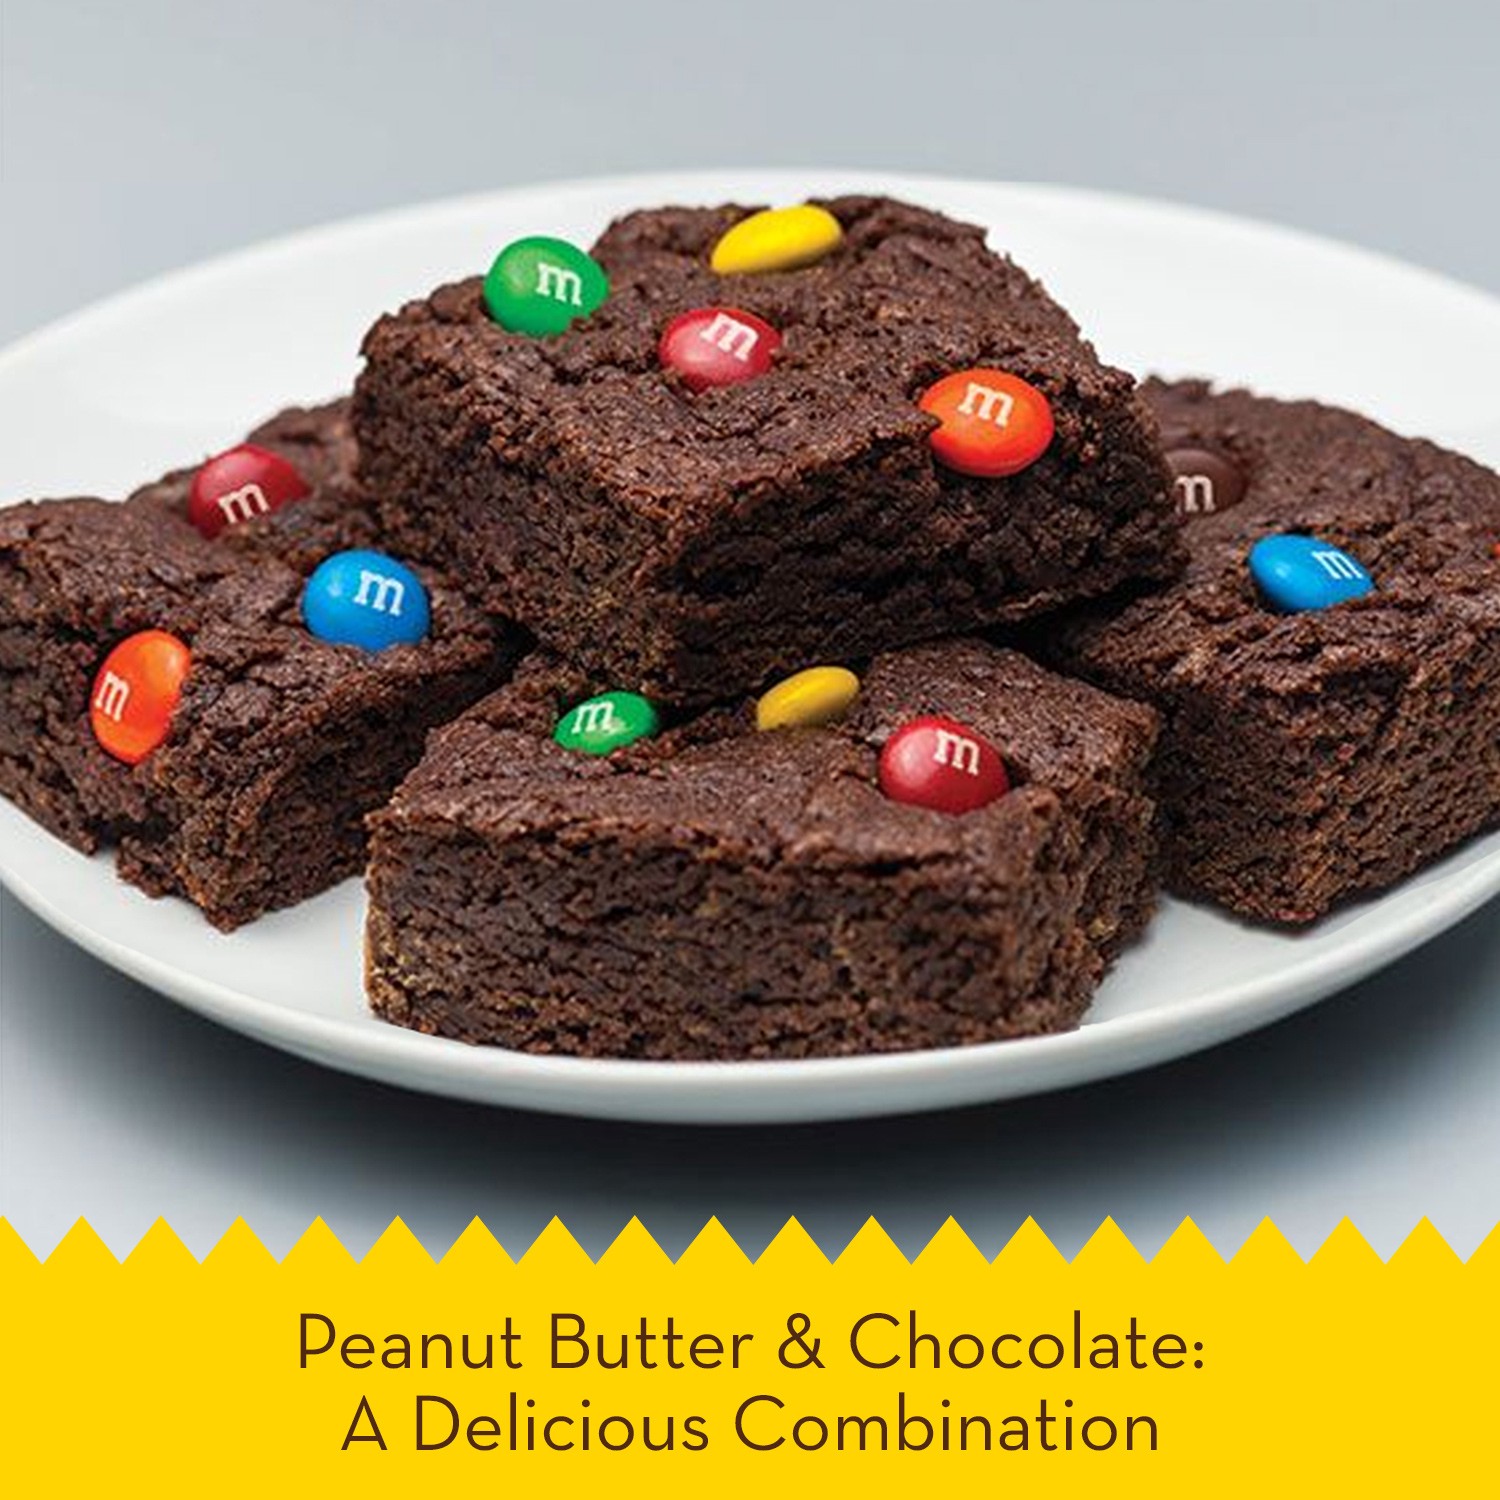 M&M's Chocolate Candies, Peanut Butter, Sharing Size